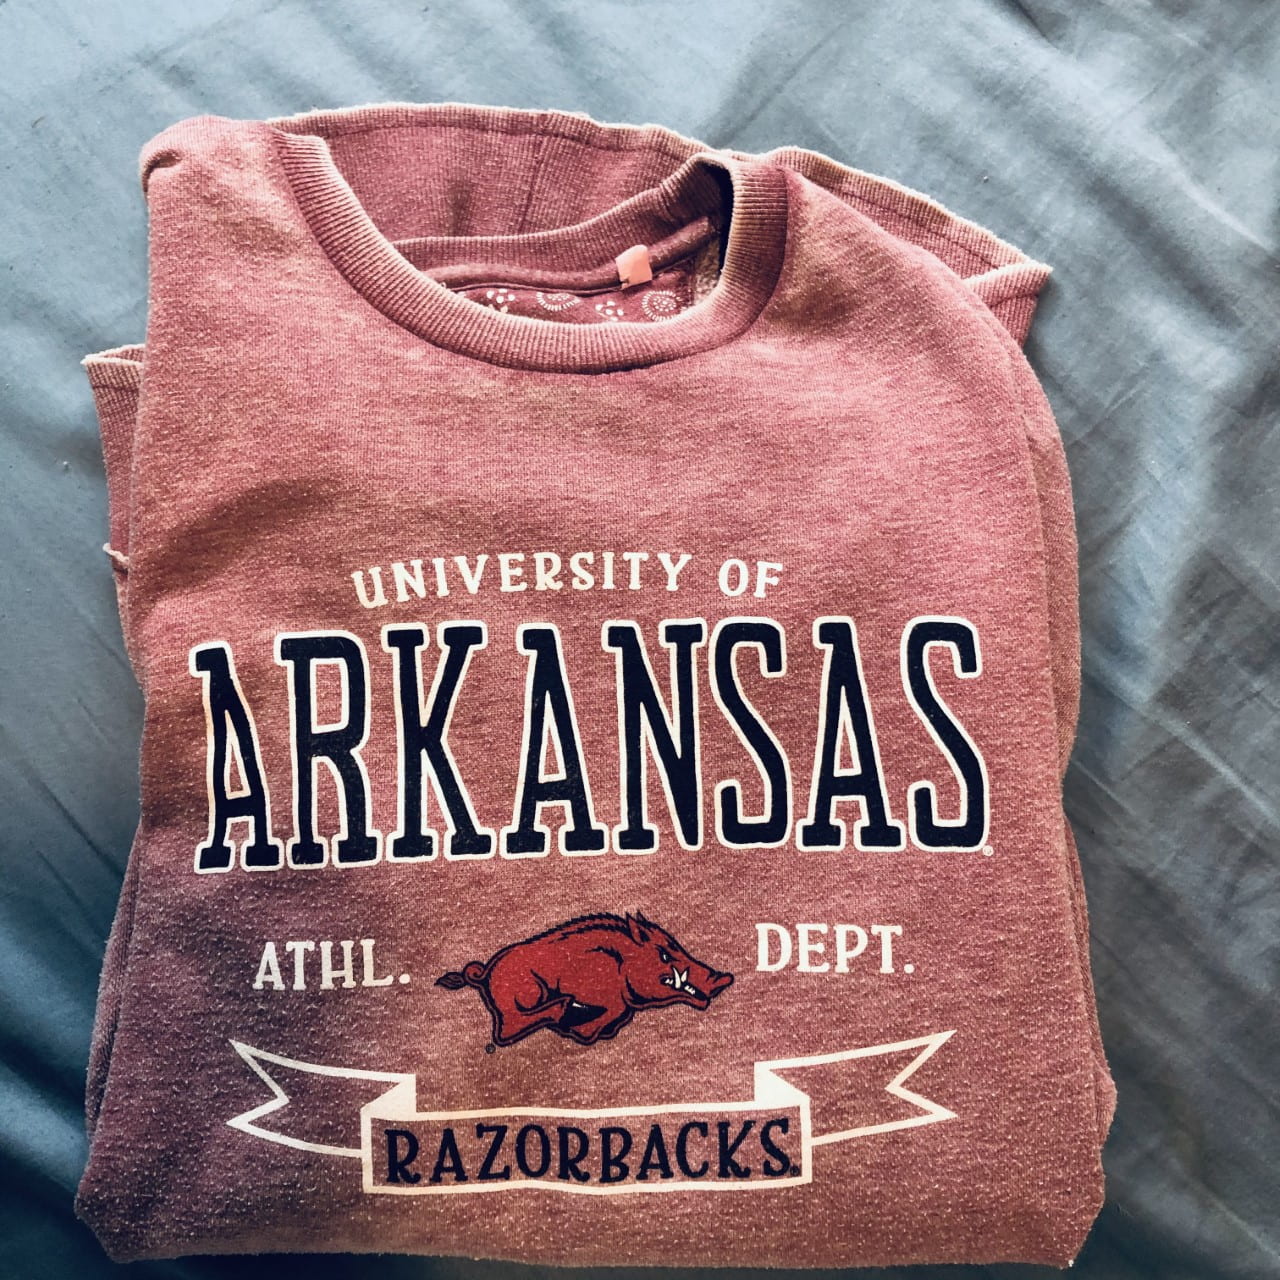 A folded light red shirt with its front facing the camera. The front has "University of Arkansas Athl. Dept. Razorbacks" with a running Razorback on it.